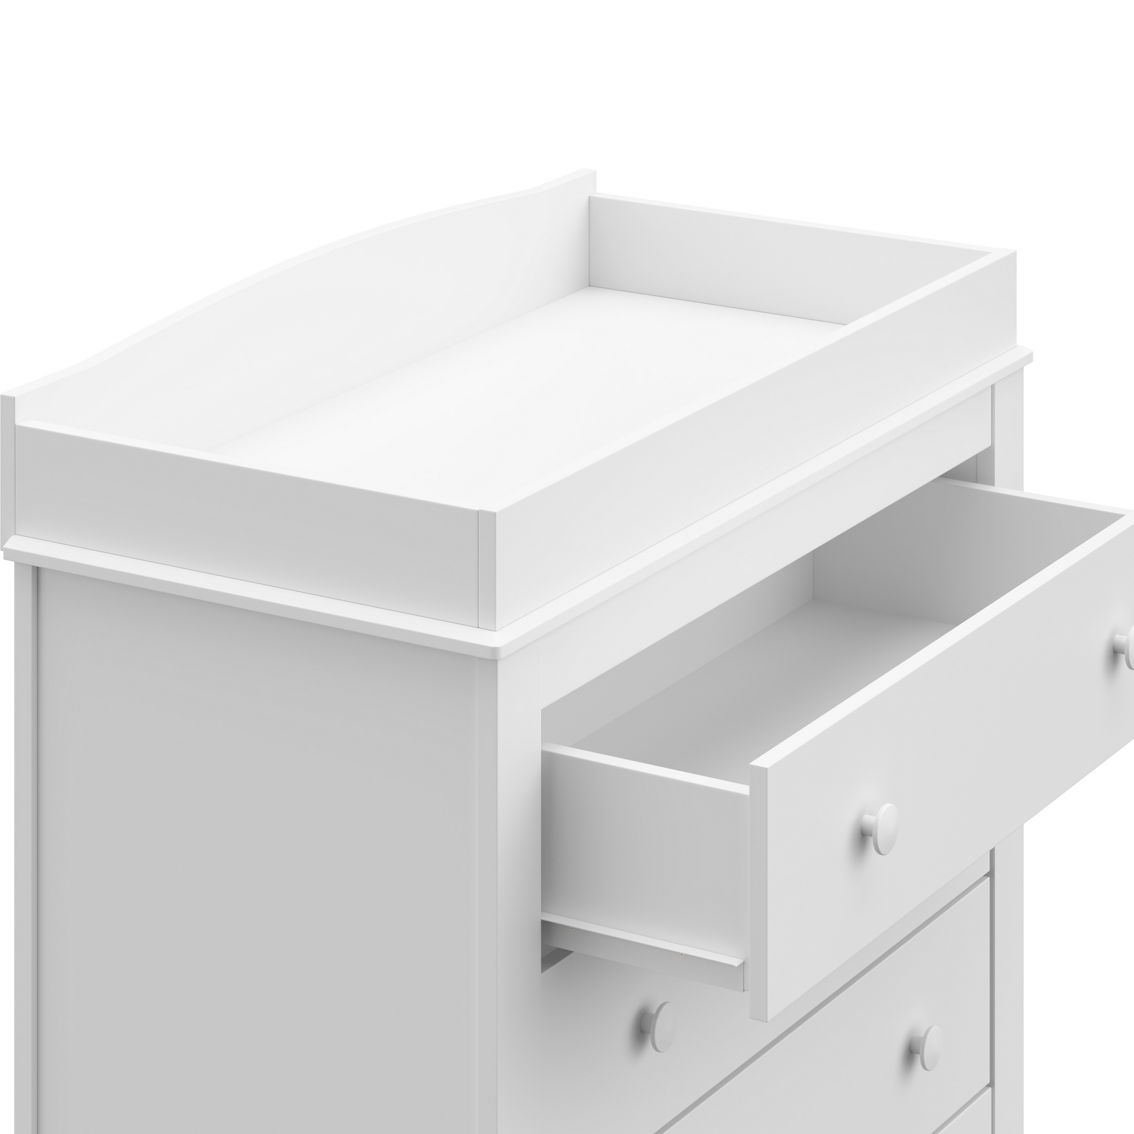 Graco Noah 3 Drawer Chest with Changing Topper - Image 5 of 9